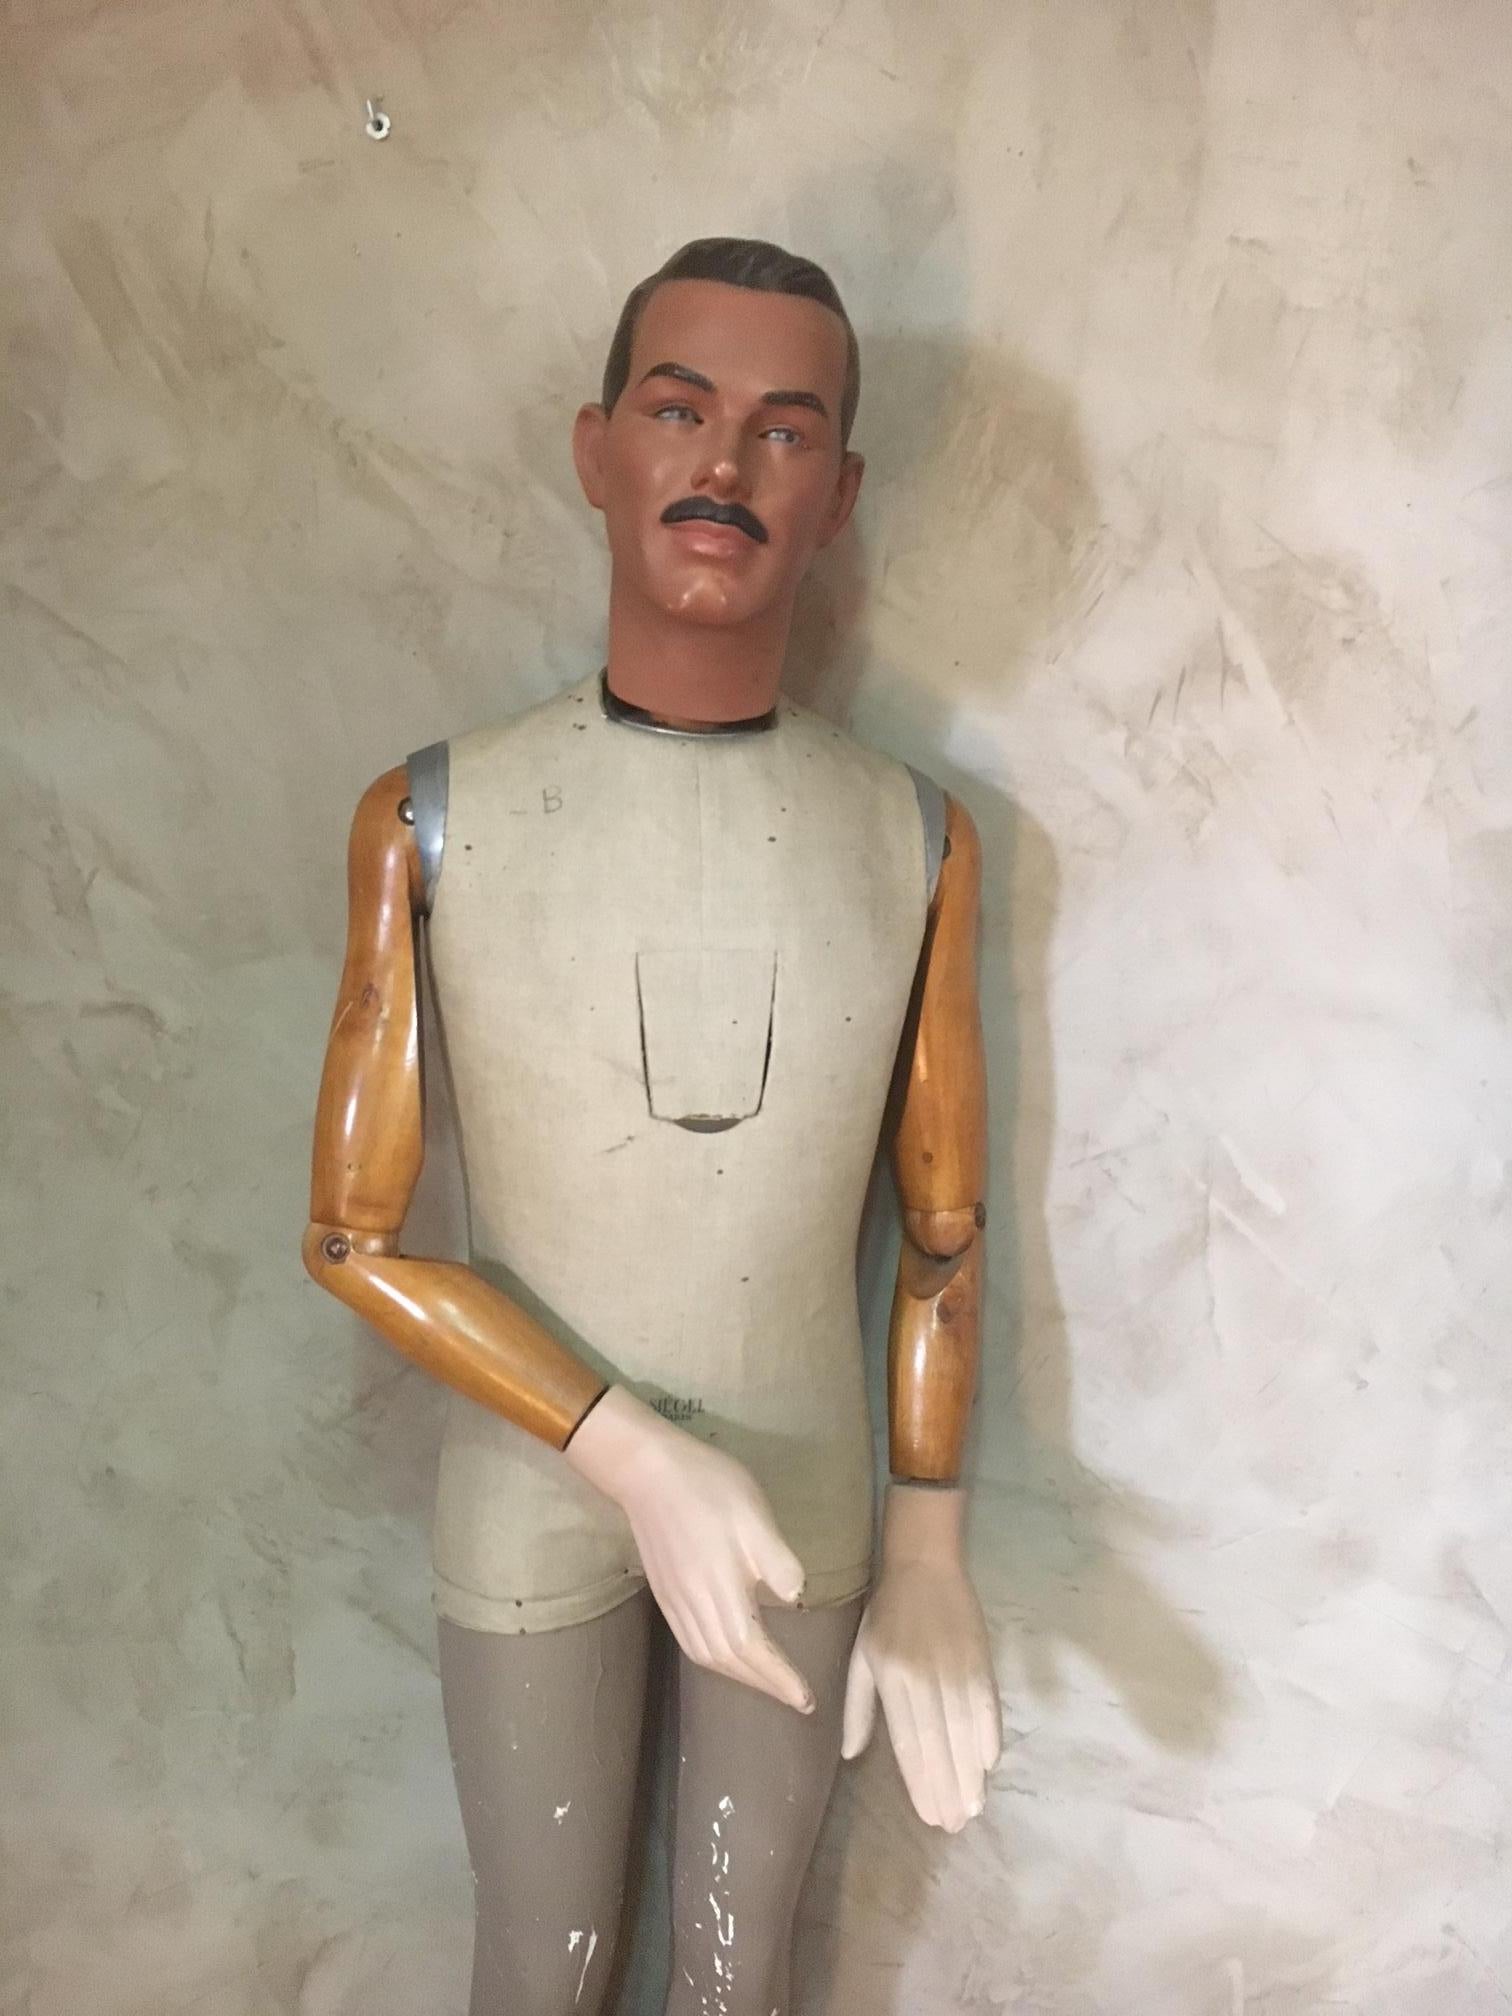 Very rare and beautiful lifesize French Siegel plaster mannequin from the 1930s.
His has blue glass eyes. The arms are articulated. The hands and the head are removable.
His painted head can turn and look different directions.
There is a metal